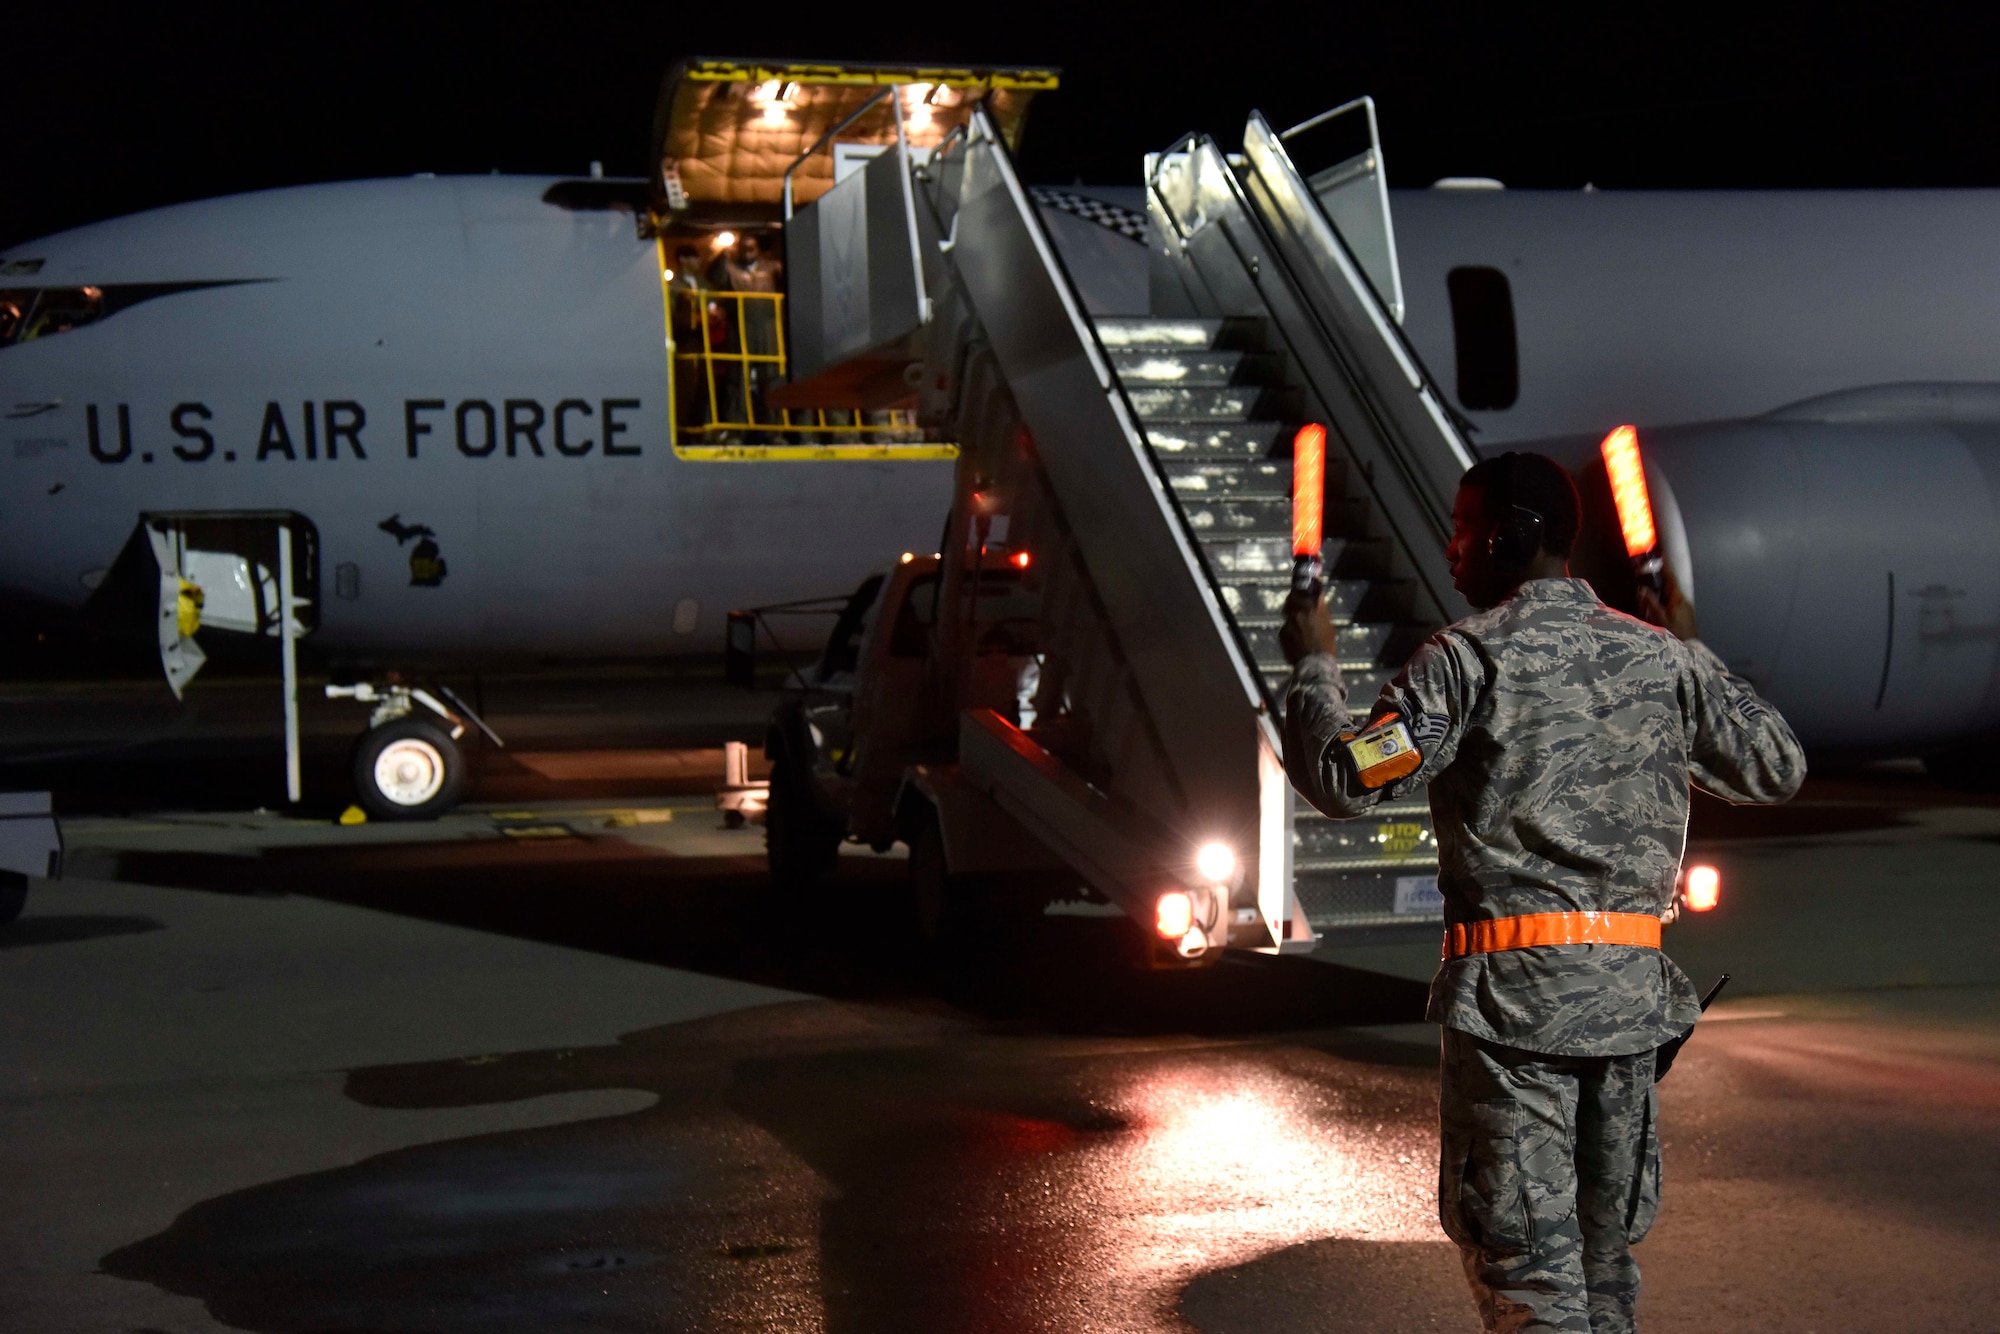 Air stairs are backed away from a KC-135 Stratotanker prior to an early evening take-off at Joint Base Pearl Harbor Hickam, Hawaii, Nov, 9, 2018.